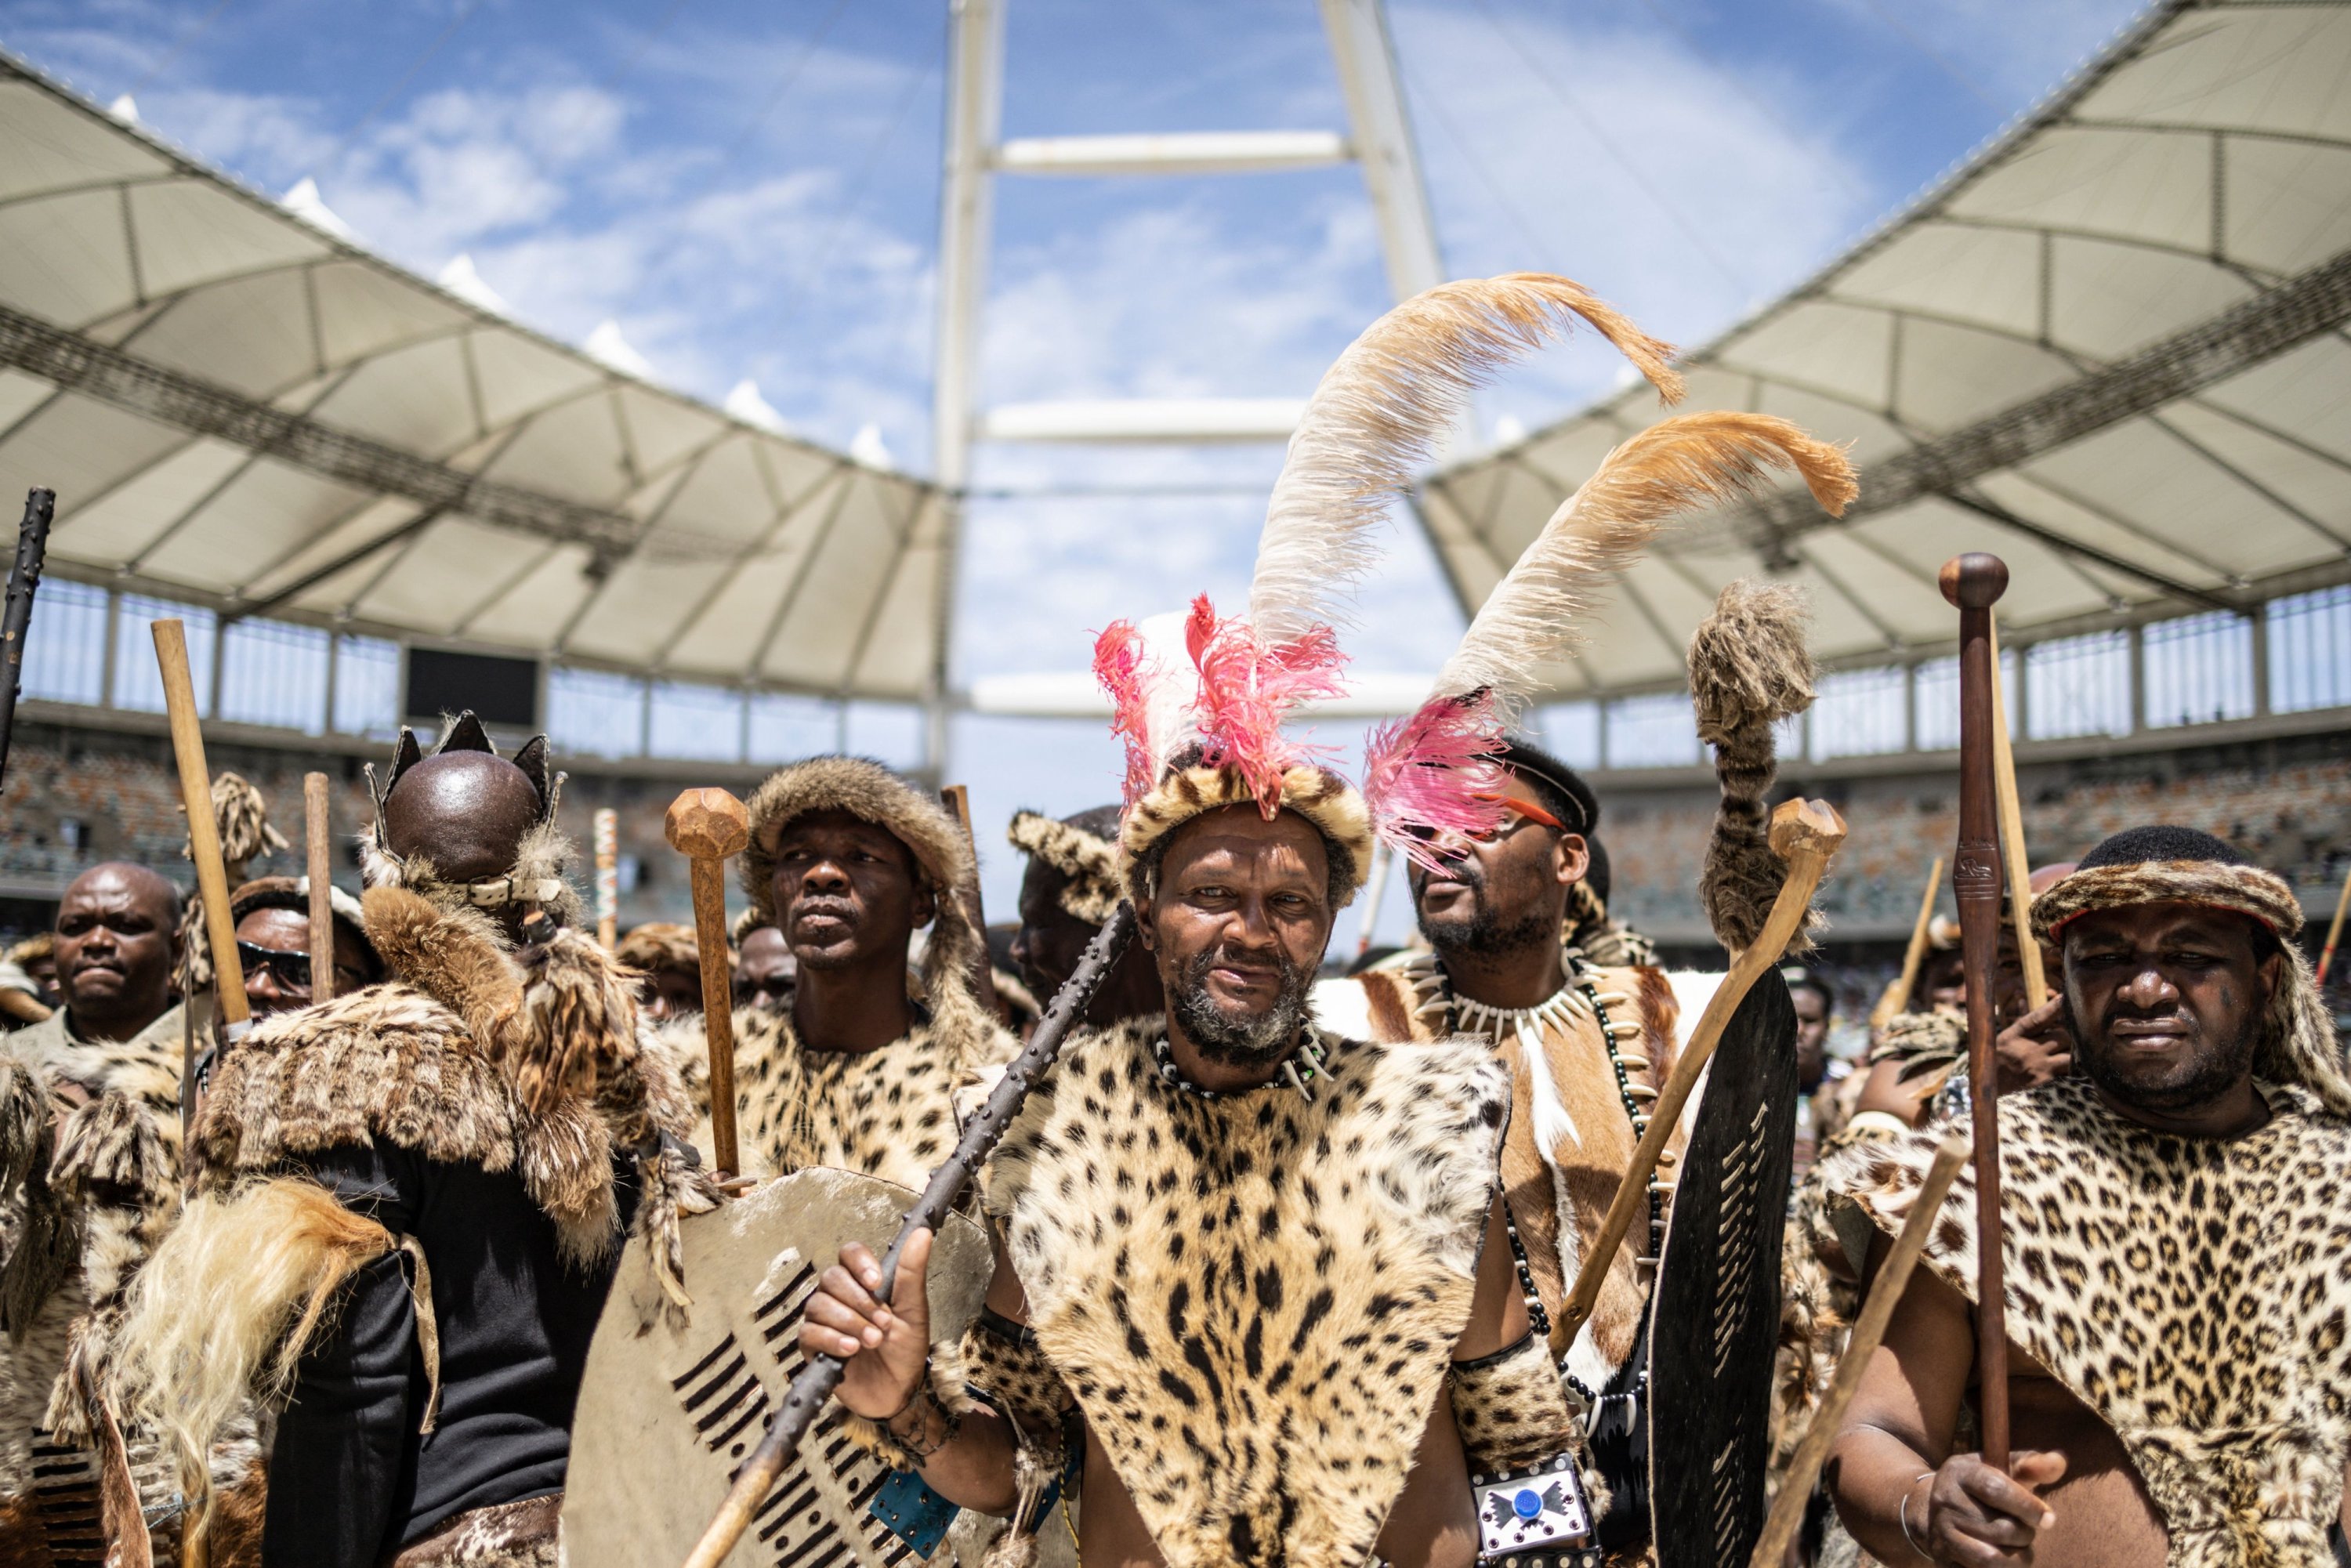 South Africa throws mega party as new Zulu king crowned | Daily Sabah